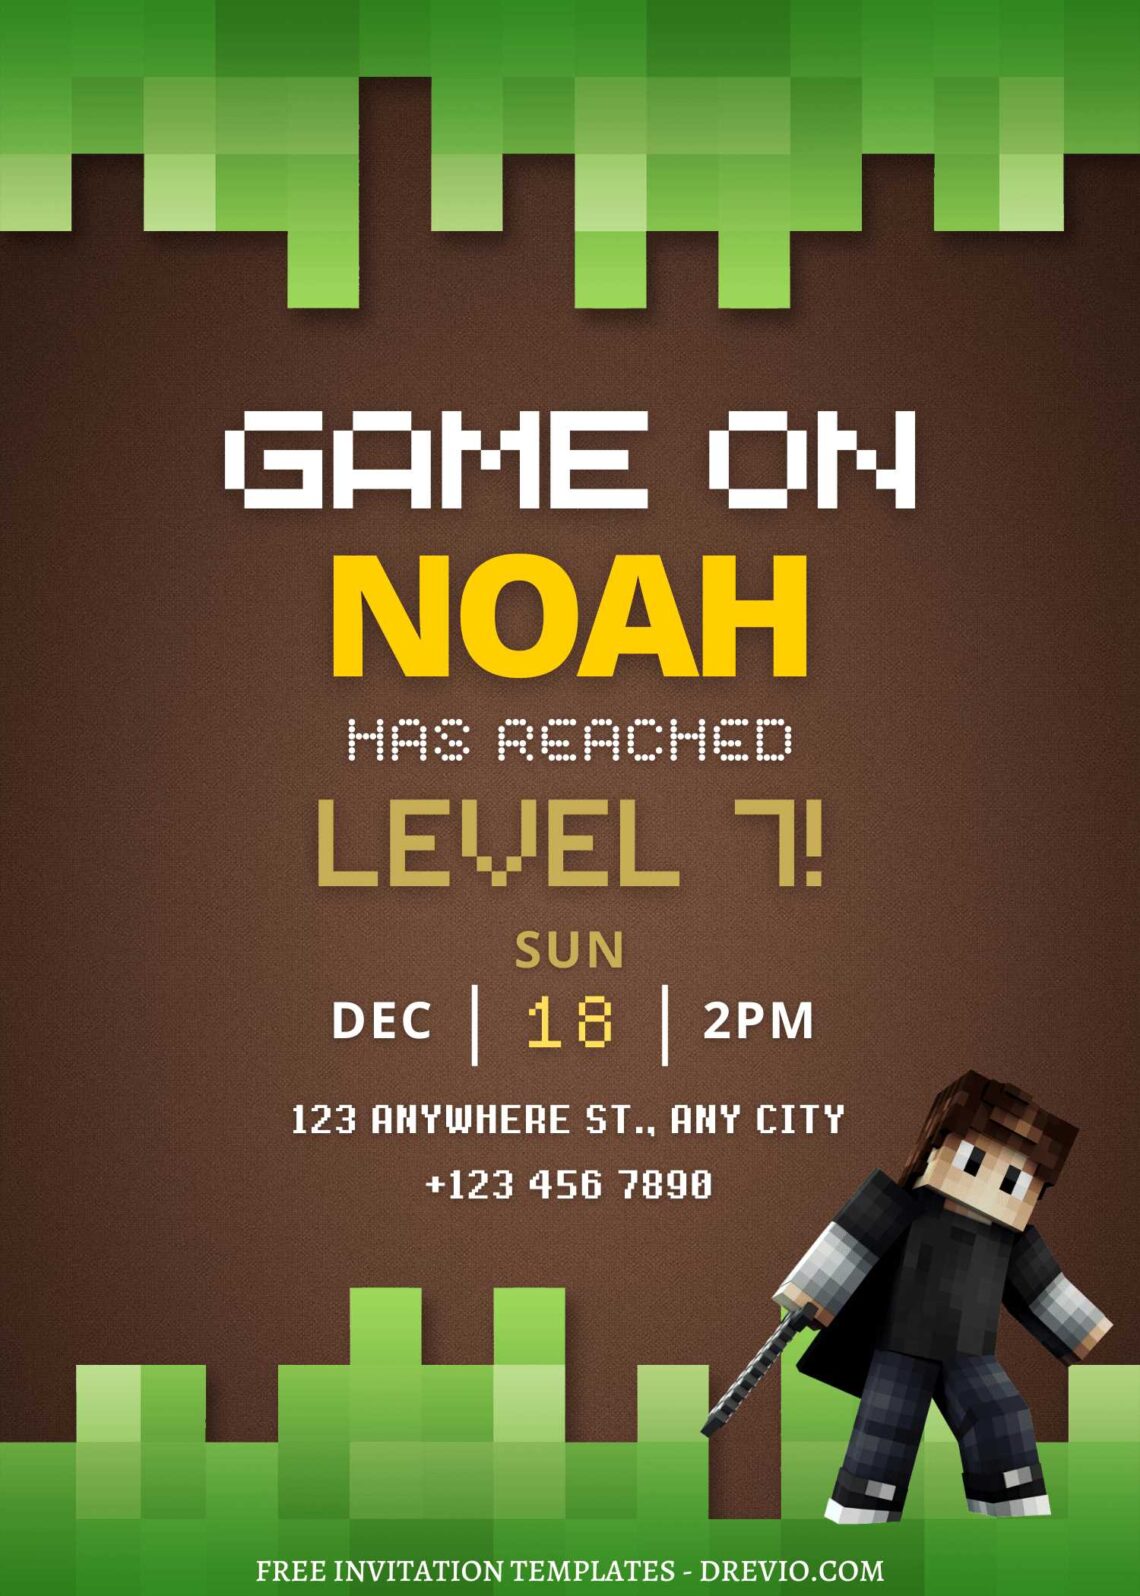 FREE EDITABLE - 11+ Awesome Minecraft Canva Birthday Invitation Templates with minecraft characters